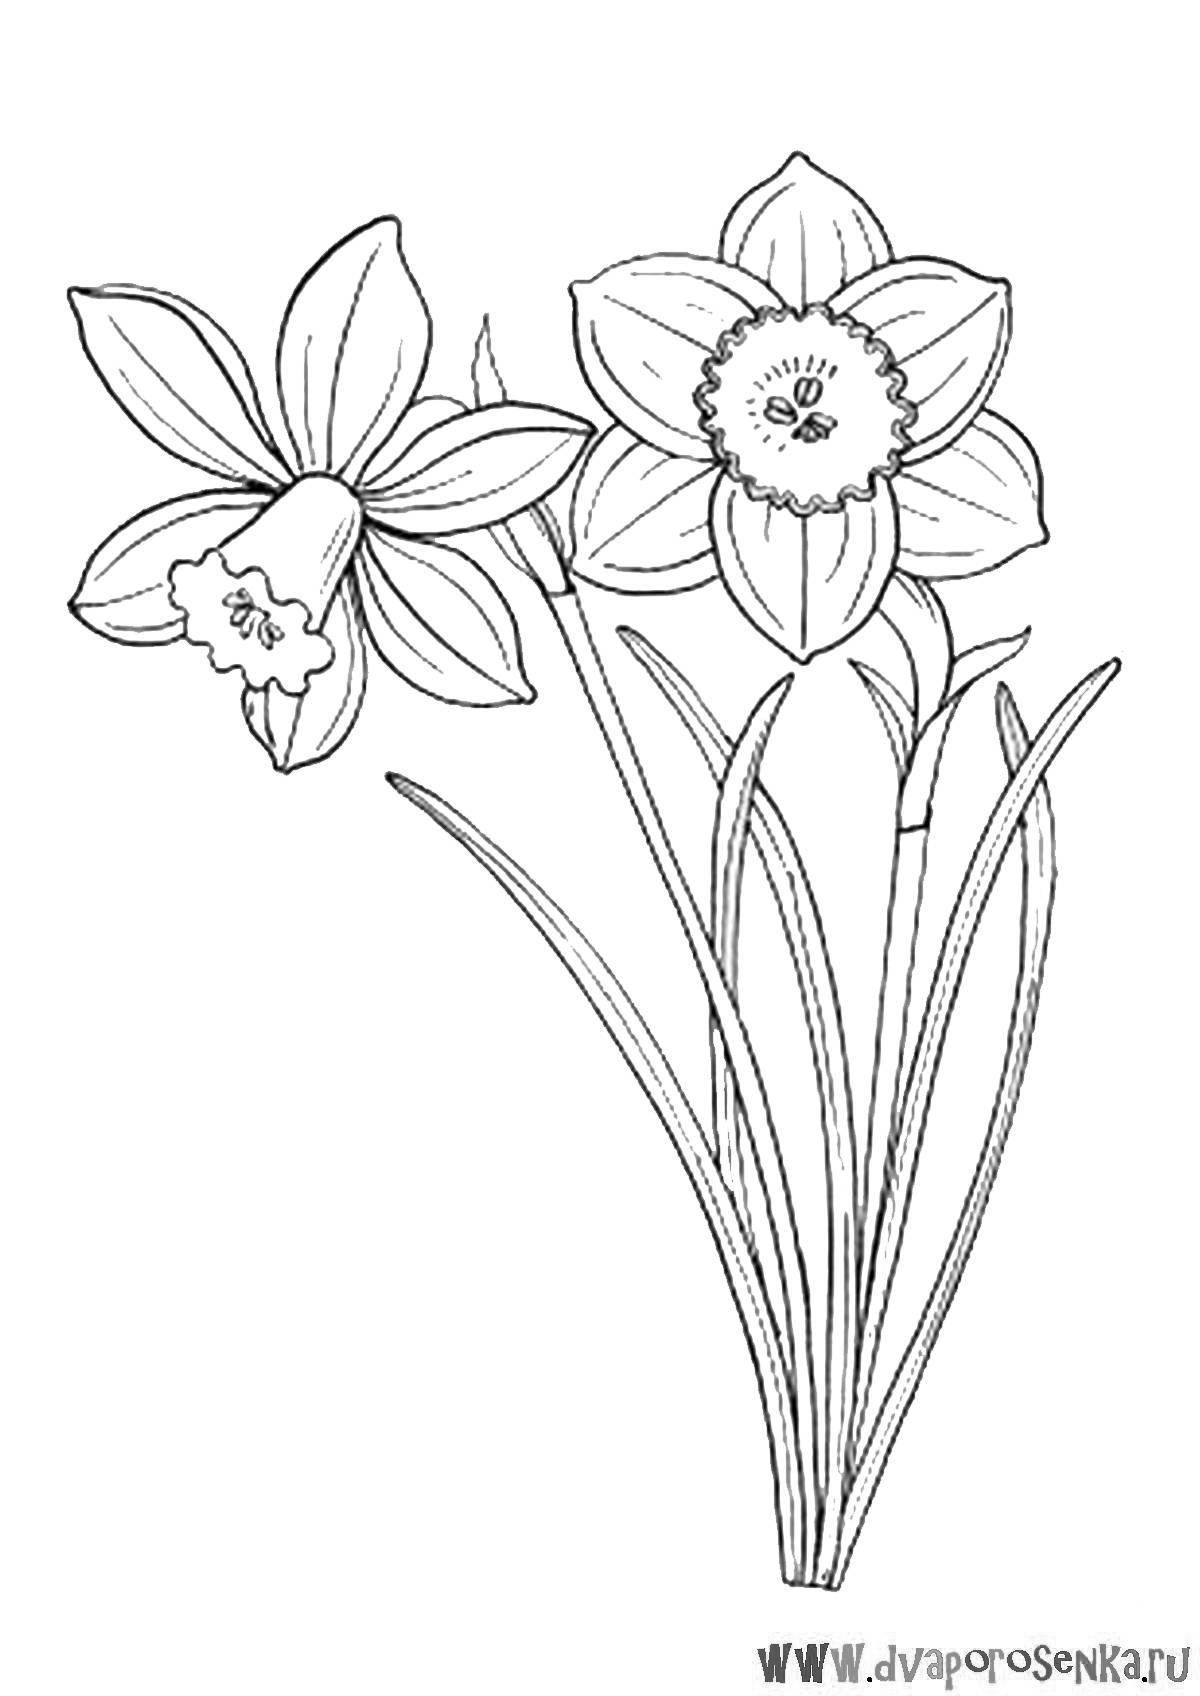 Colouring stunning narcissus flower